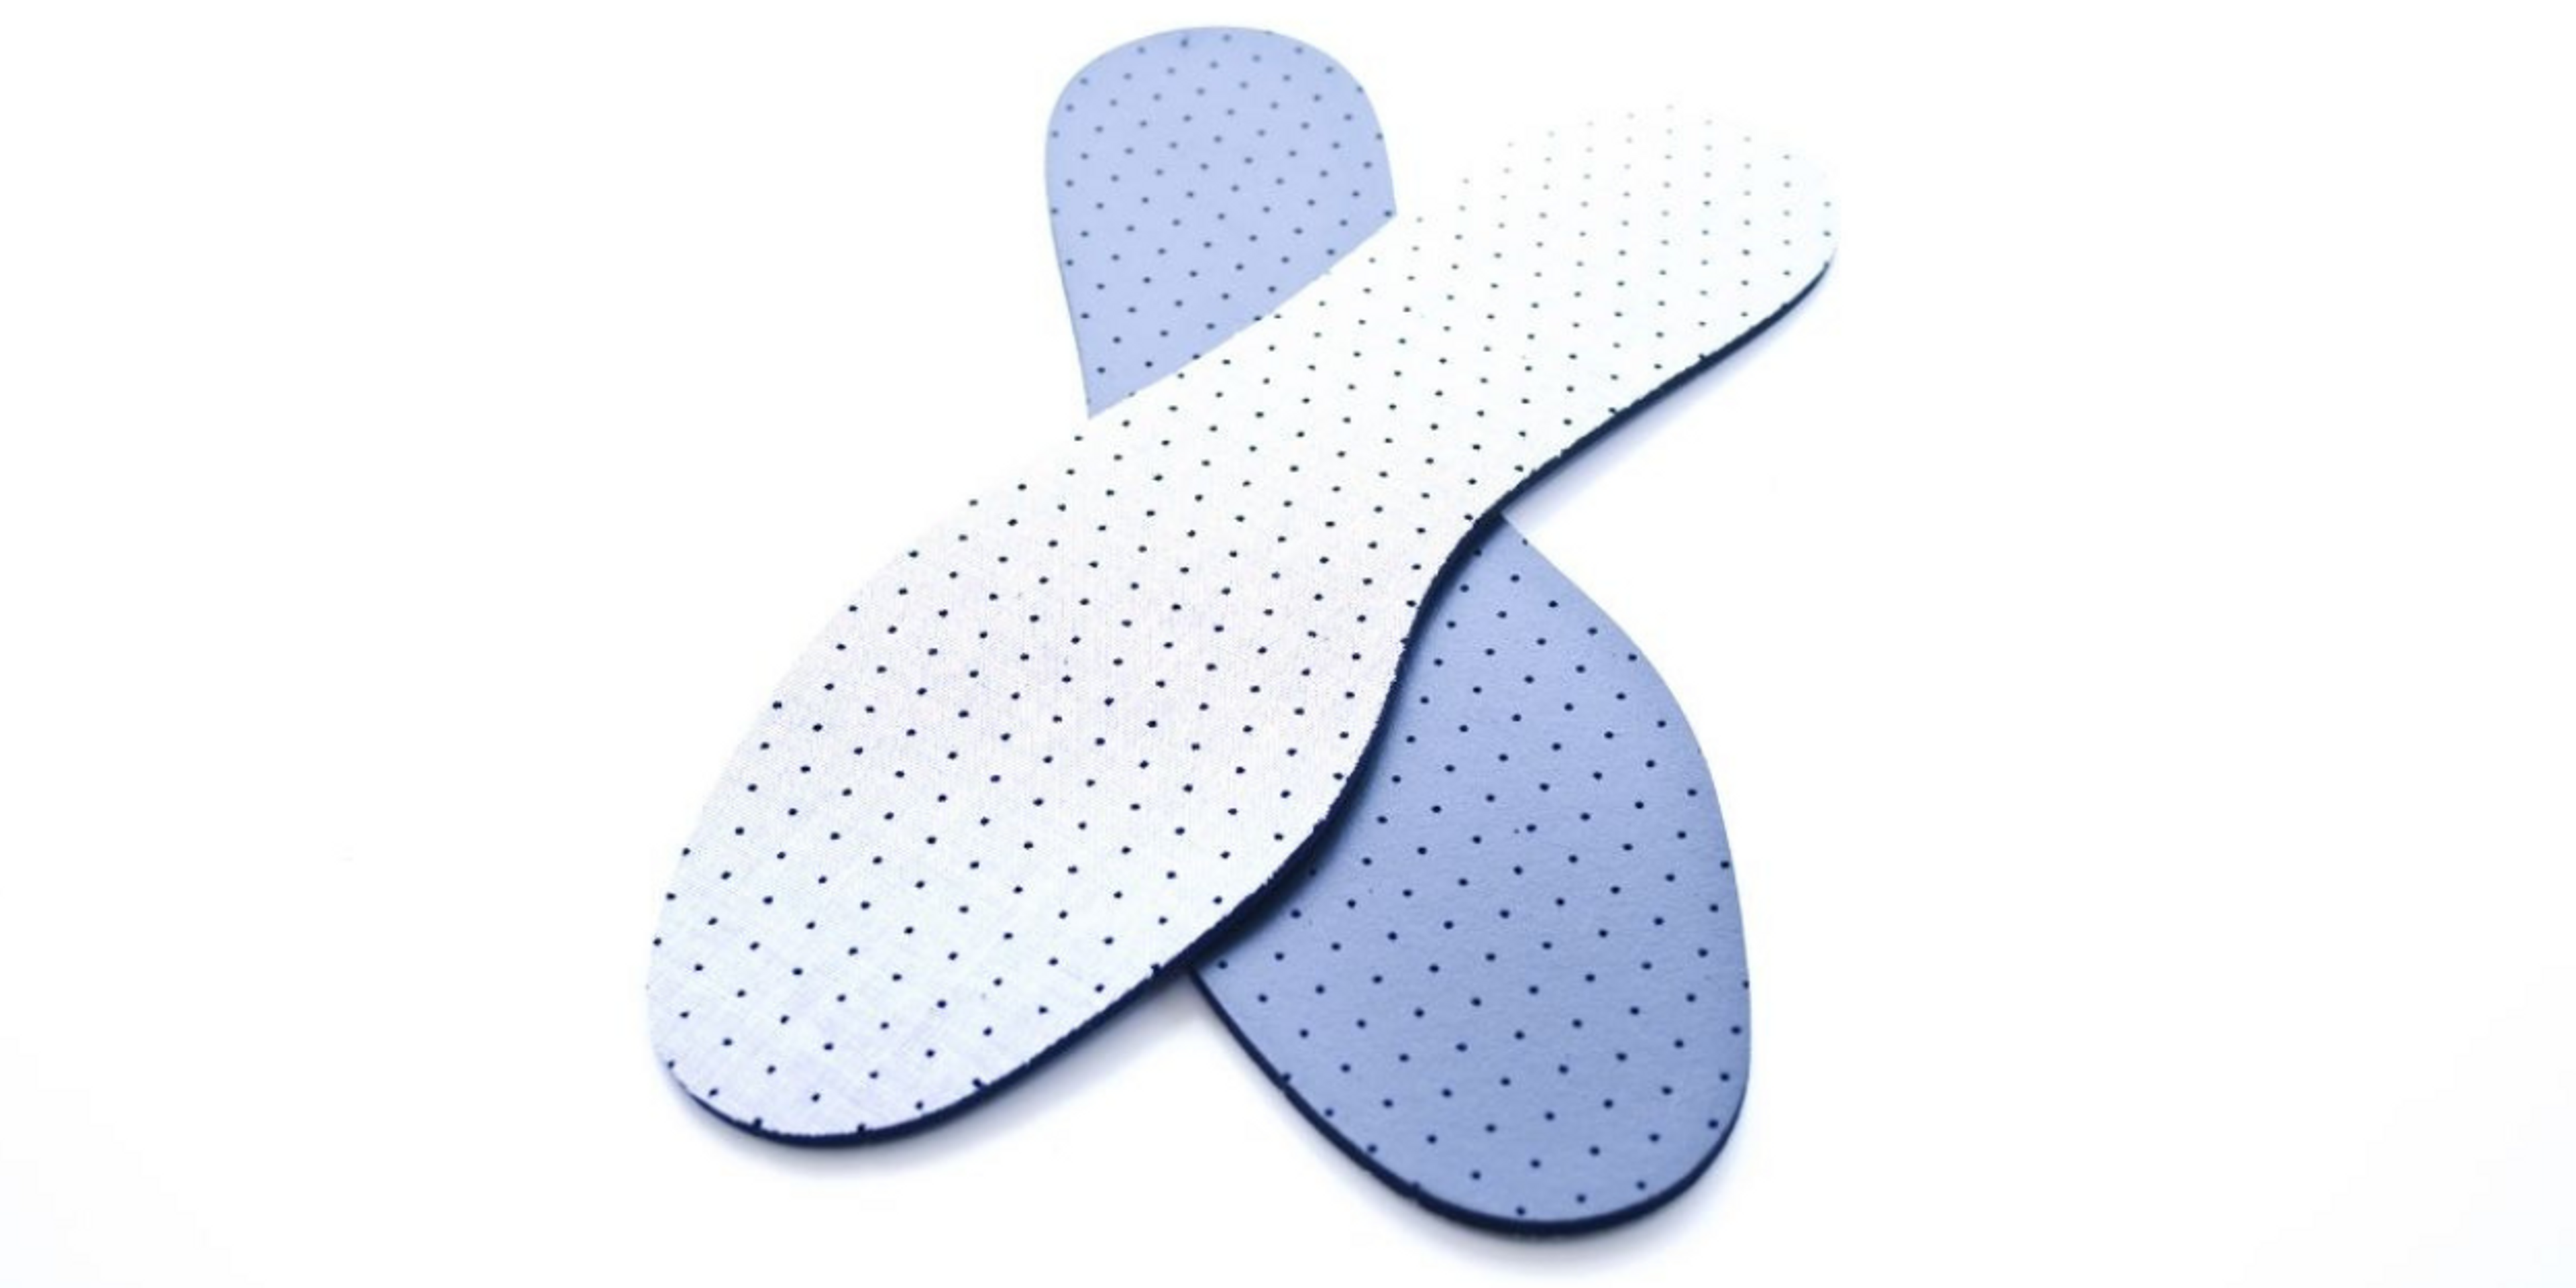 Soft unsupportive insoles offer no arch support and will likely not help for plantar fasciitis.